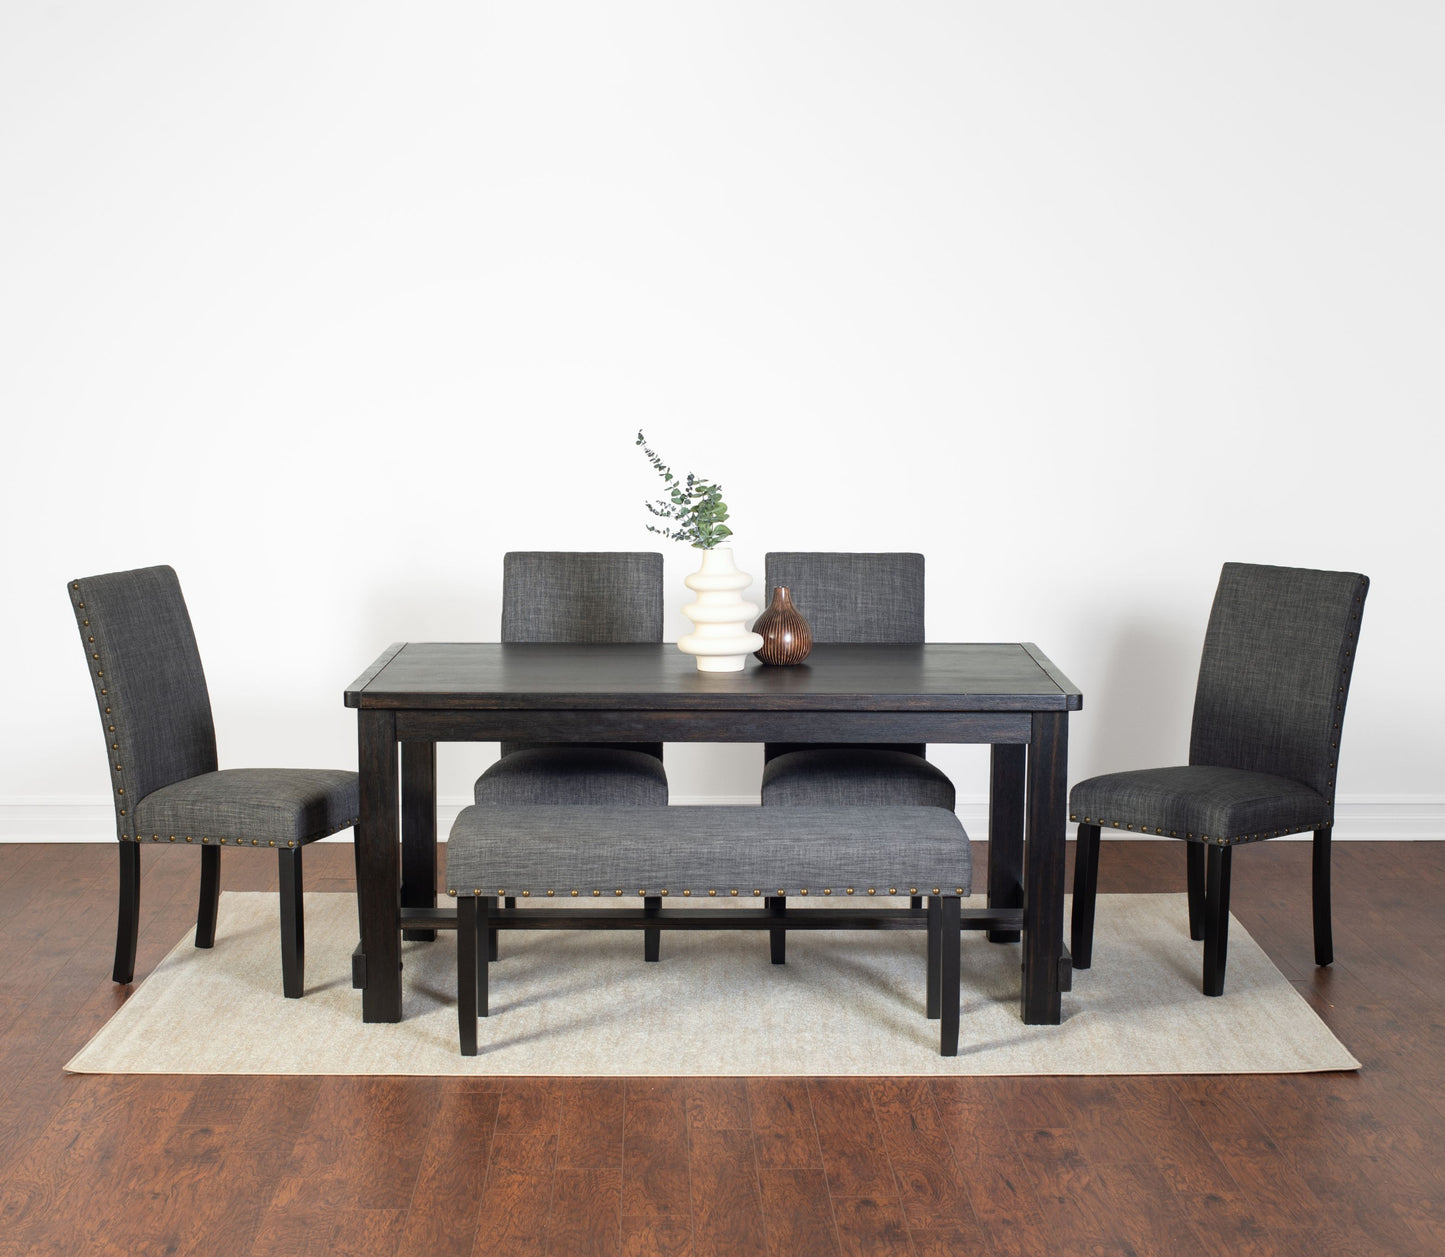 Muzzi Contemporary 6-Piece Dining Set, Dining Table with 4 Stylish Chairs and a Bench